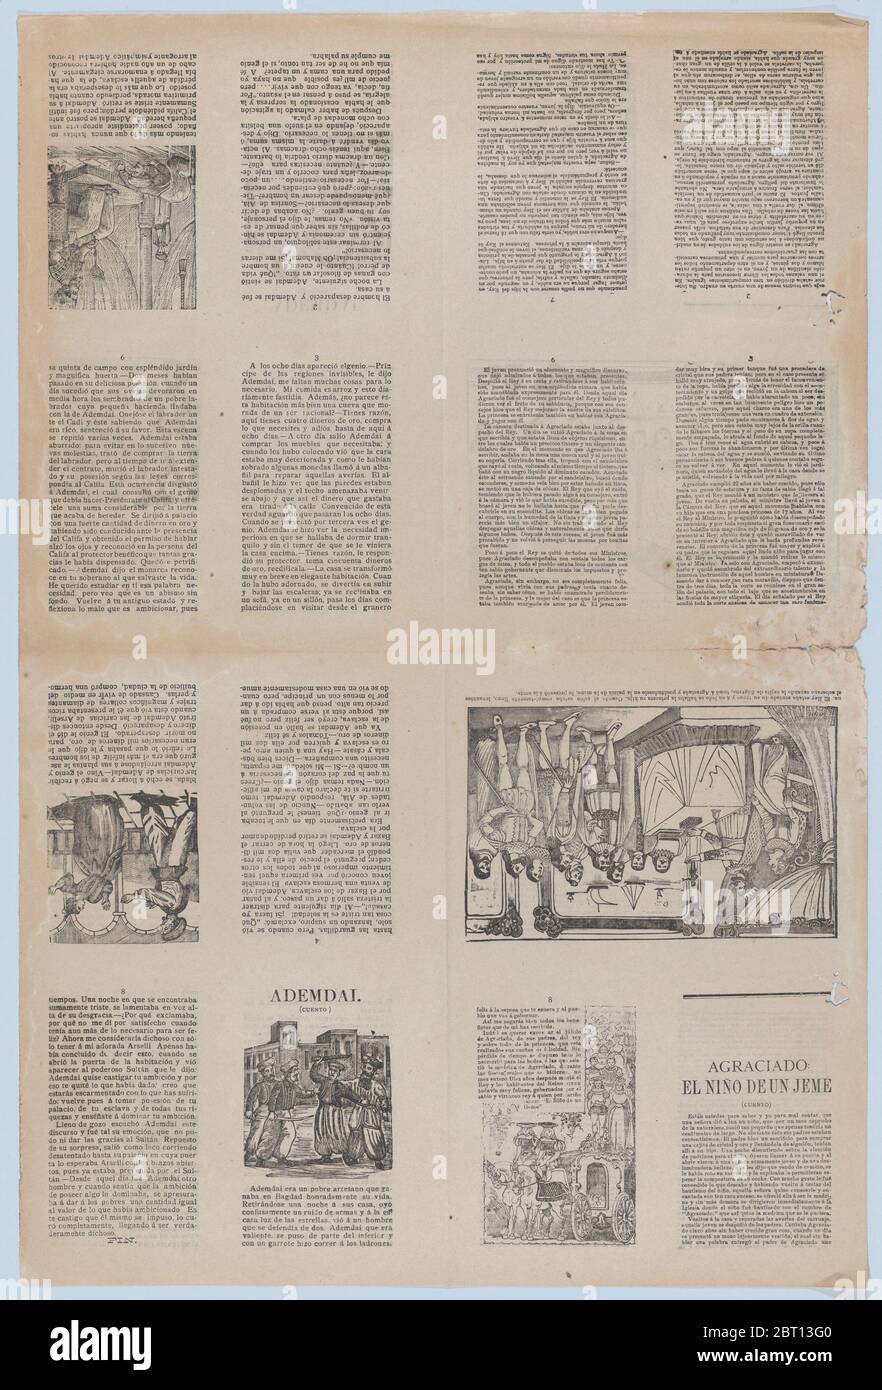 An uncut sheet printed on both sides with pages and illustrations: 'Ademdai' and 'Agraciado: El ni&#xf1;o de un jeme', ca. 1900-1910. Stock Photo